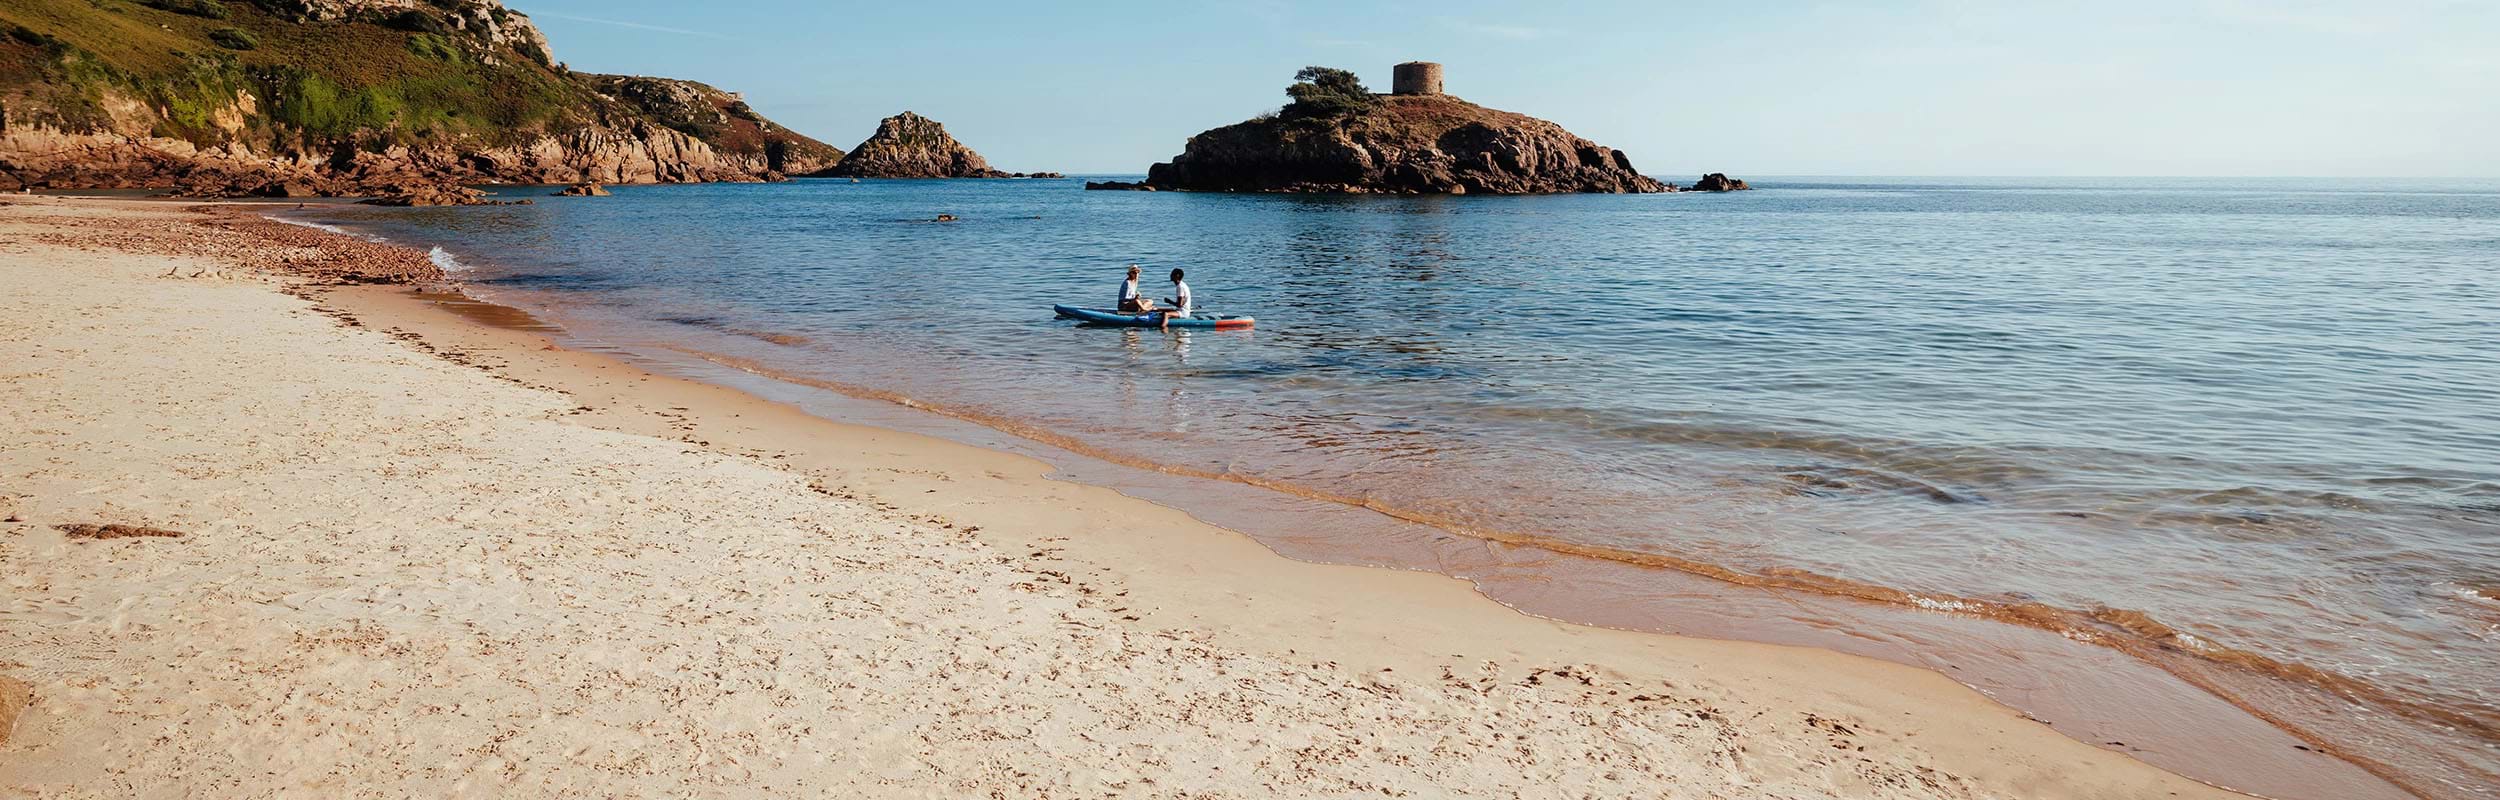 Sail away to Jersey, from £90